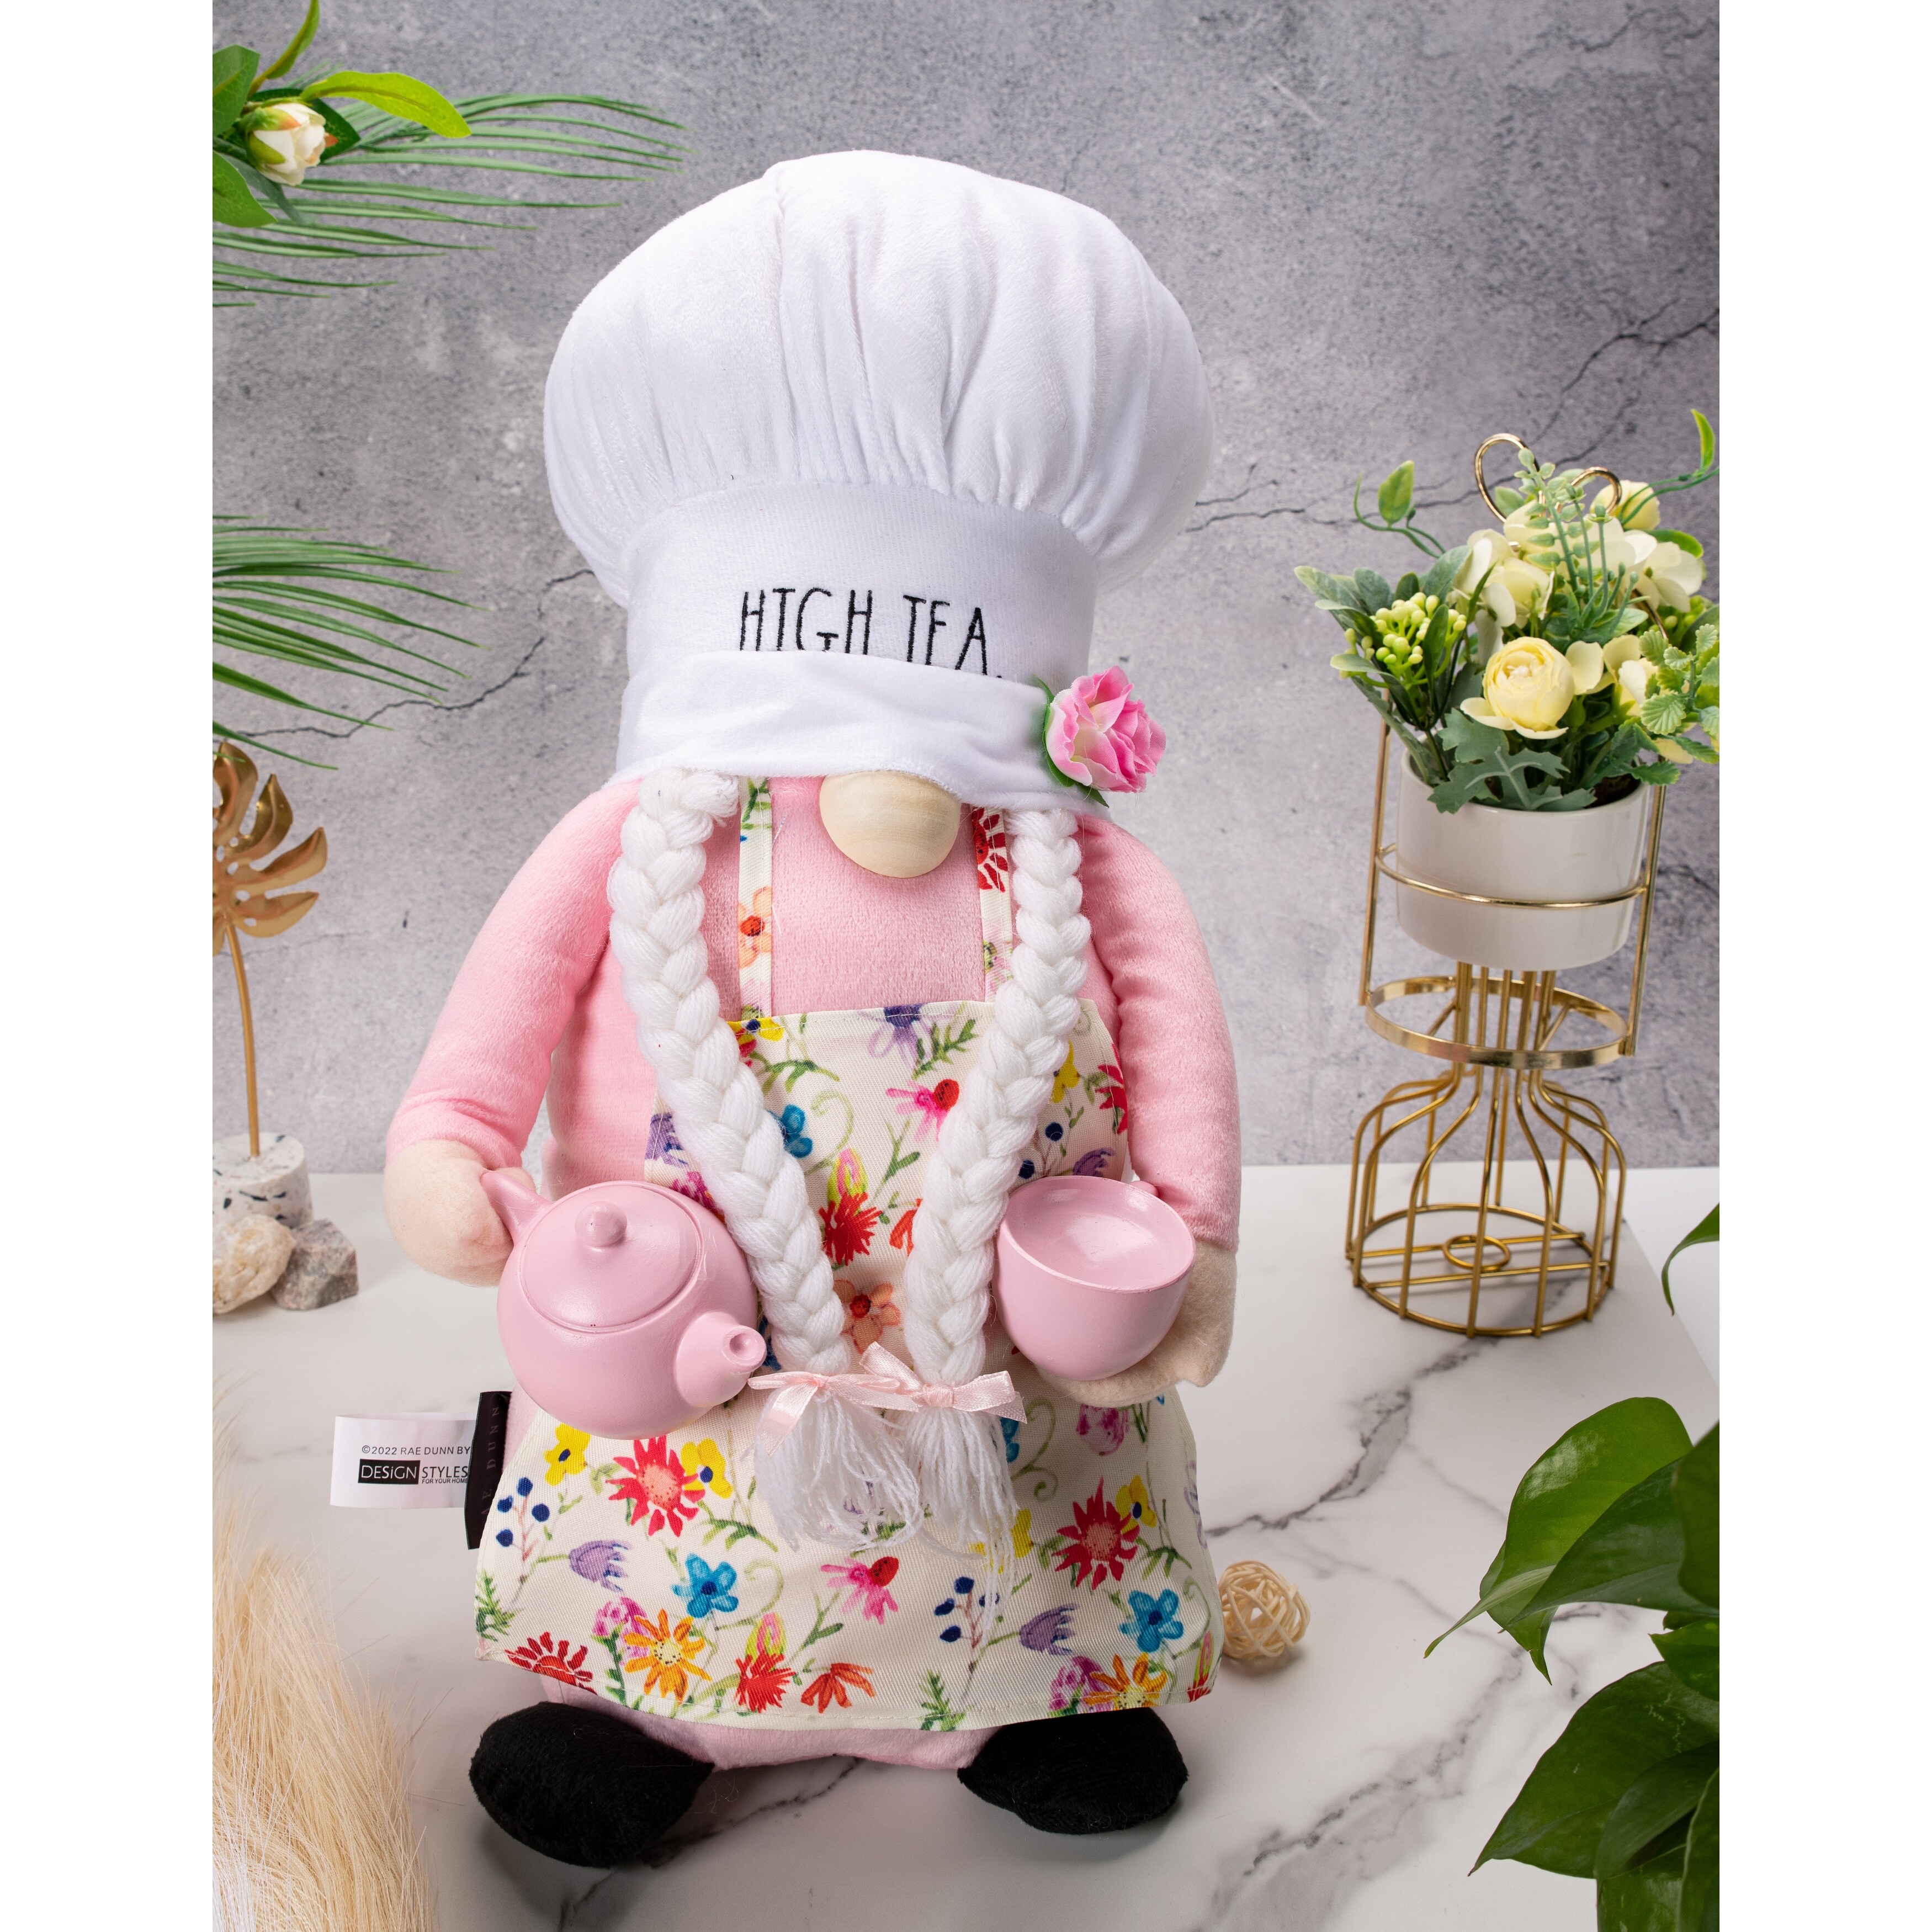 https://ak1.ostkcdn.com/images/products/is/images/direct/3119ce9e03eccb0b77b48a488fd3fc0f9aff87e6/Rae-Dunn-Plush-Kitchen-Gnome.jpg